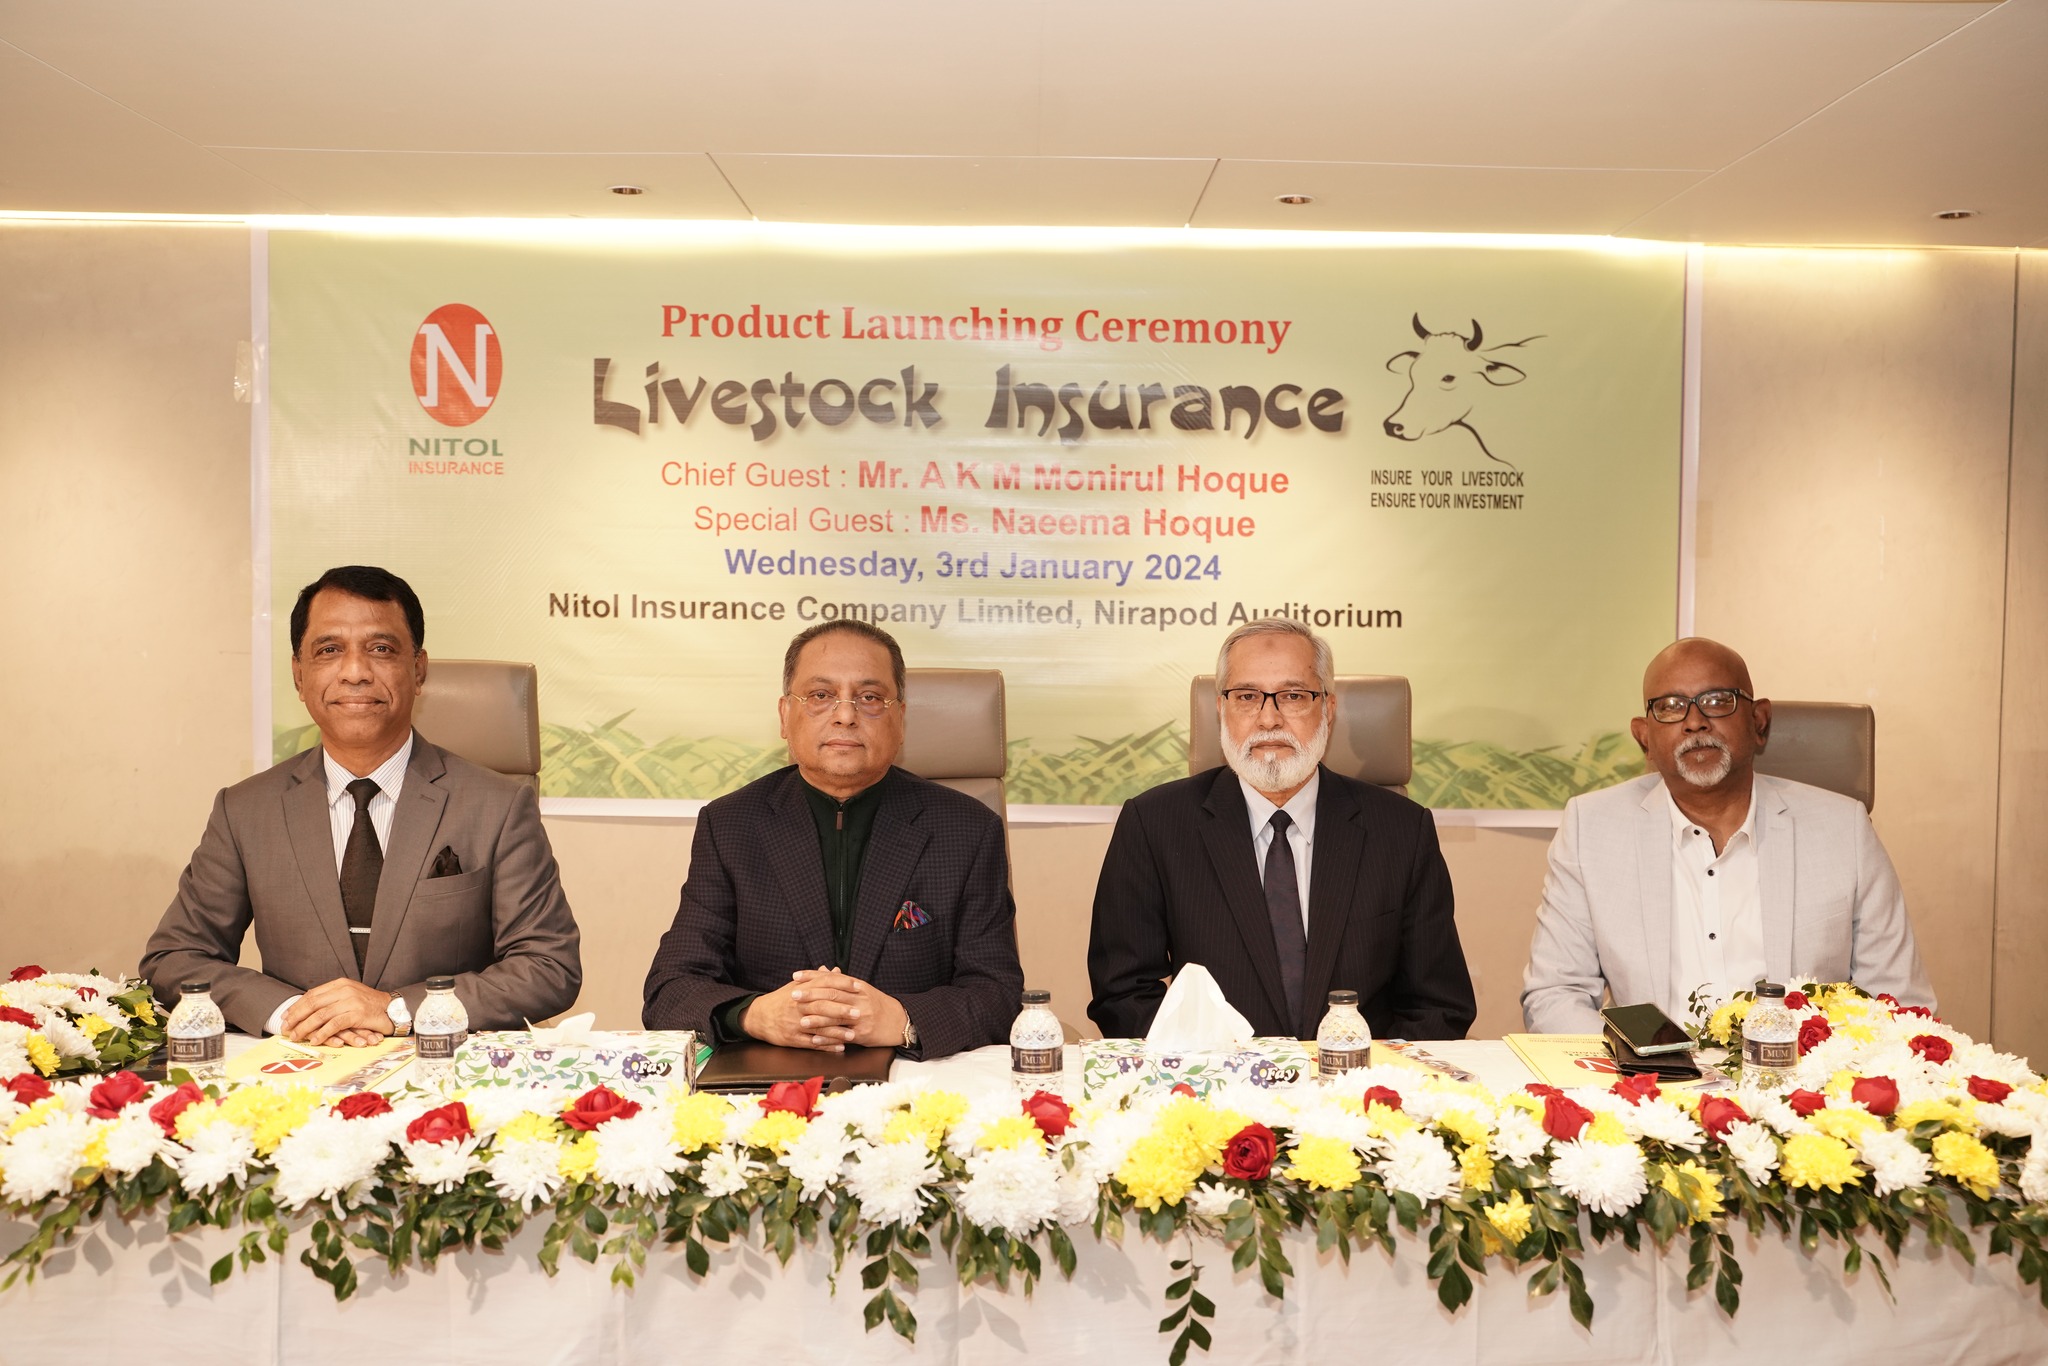 Nitol Insurance Company Ltd proudly unveils the 𝑳𝒊𝒗𝒆𝒔𝒕𝒐𝒄𝒌 𝑰𝒏𝒔𝒖𝒓𝒂𝒏𝒄𝒆 𝑷𝒐𝒍𝒊𝒄𝒚